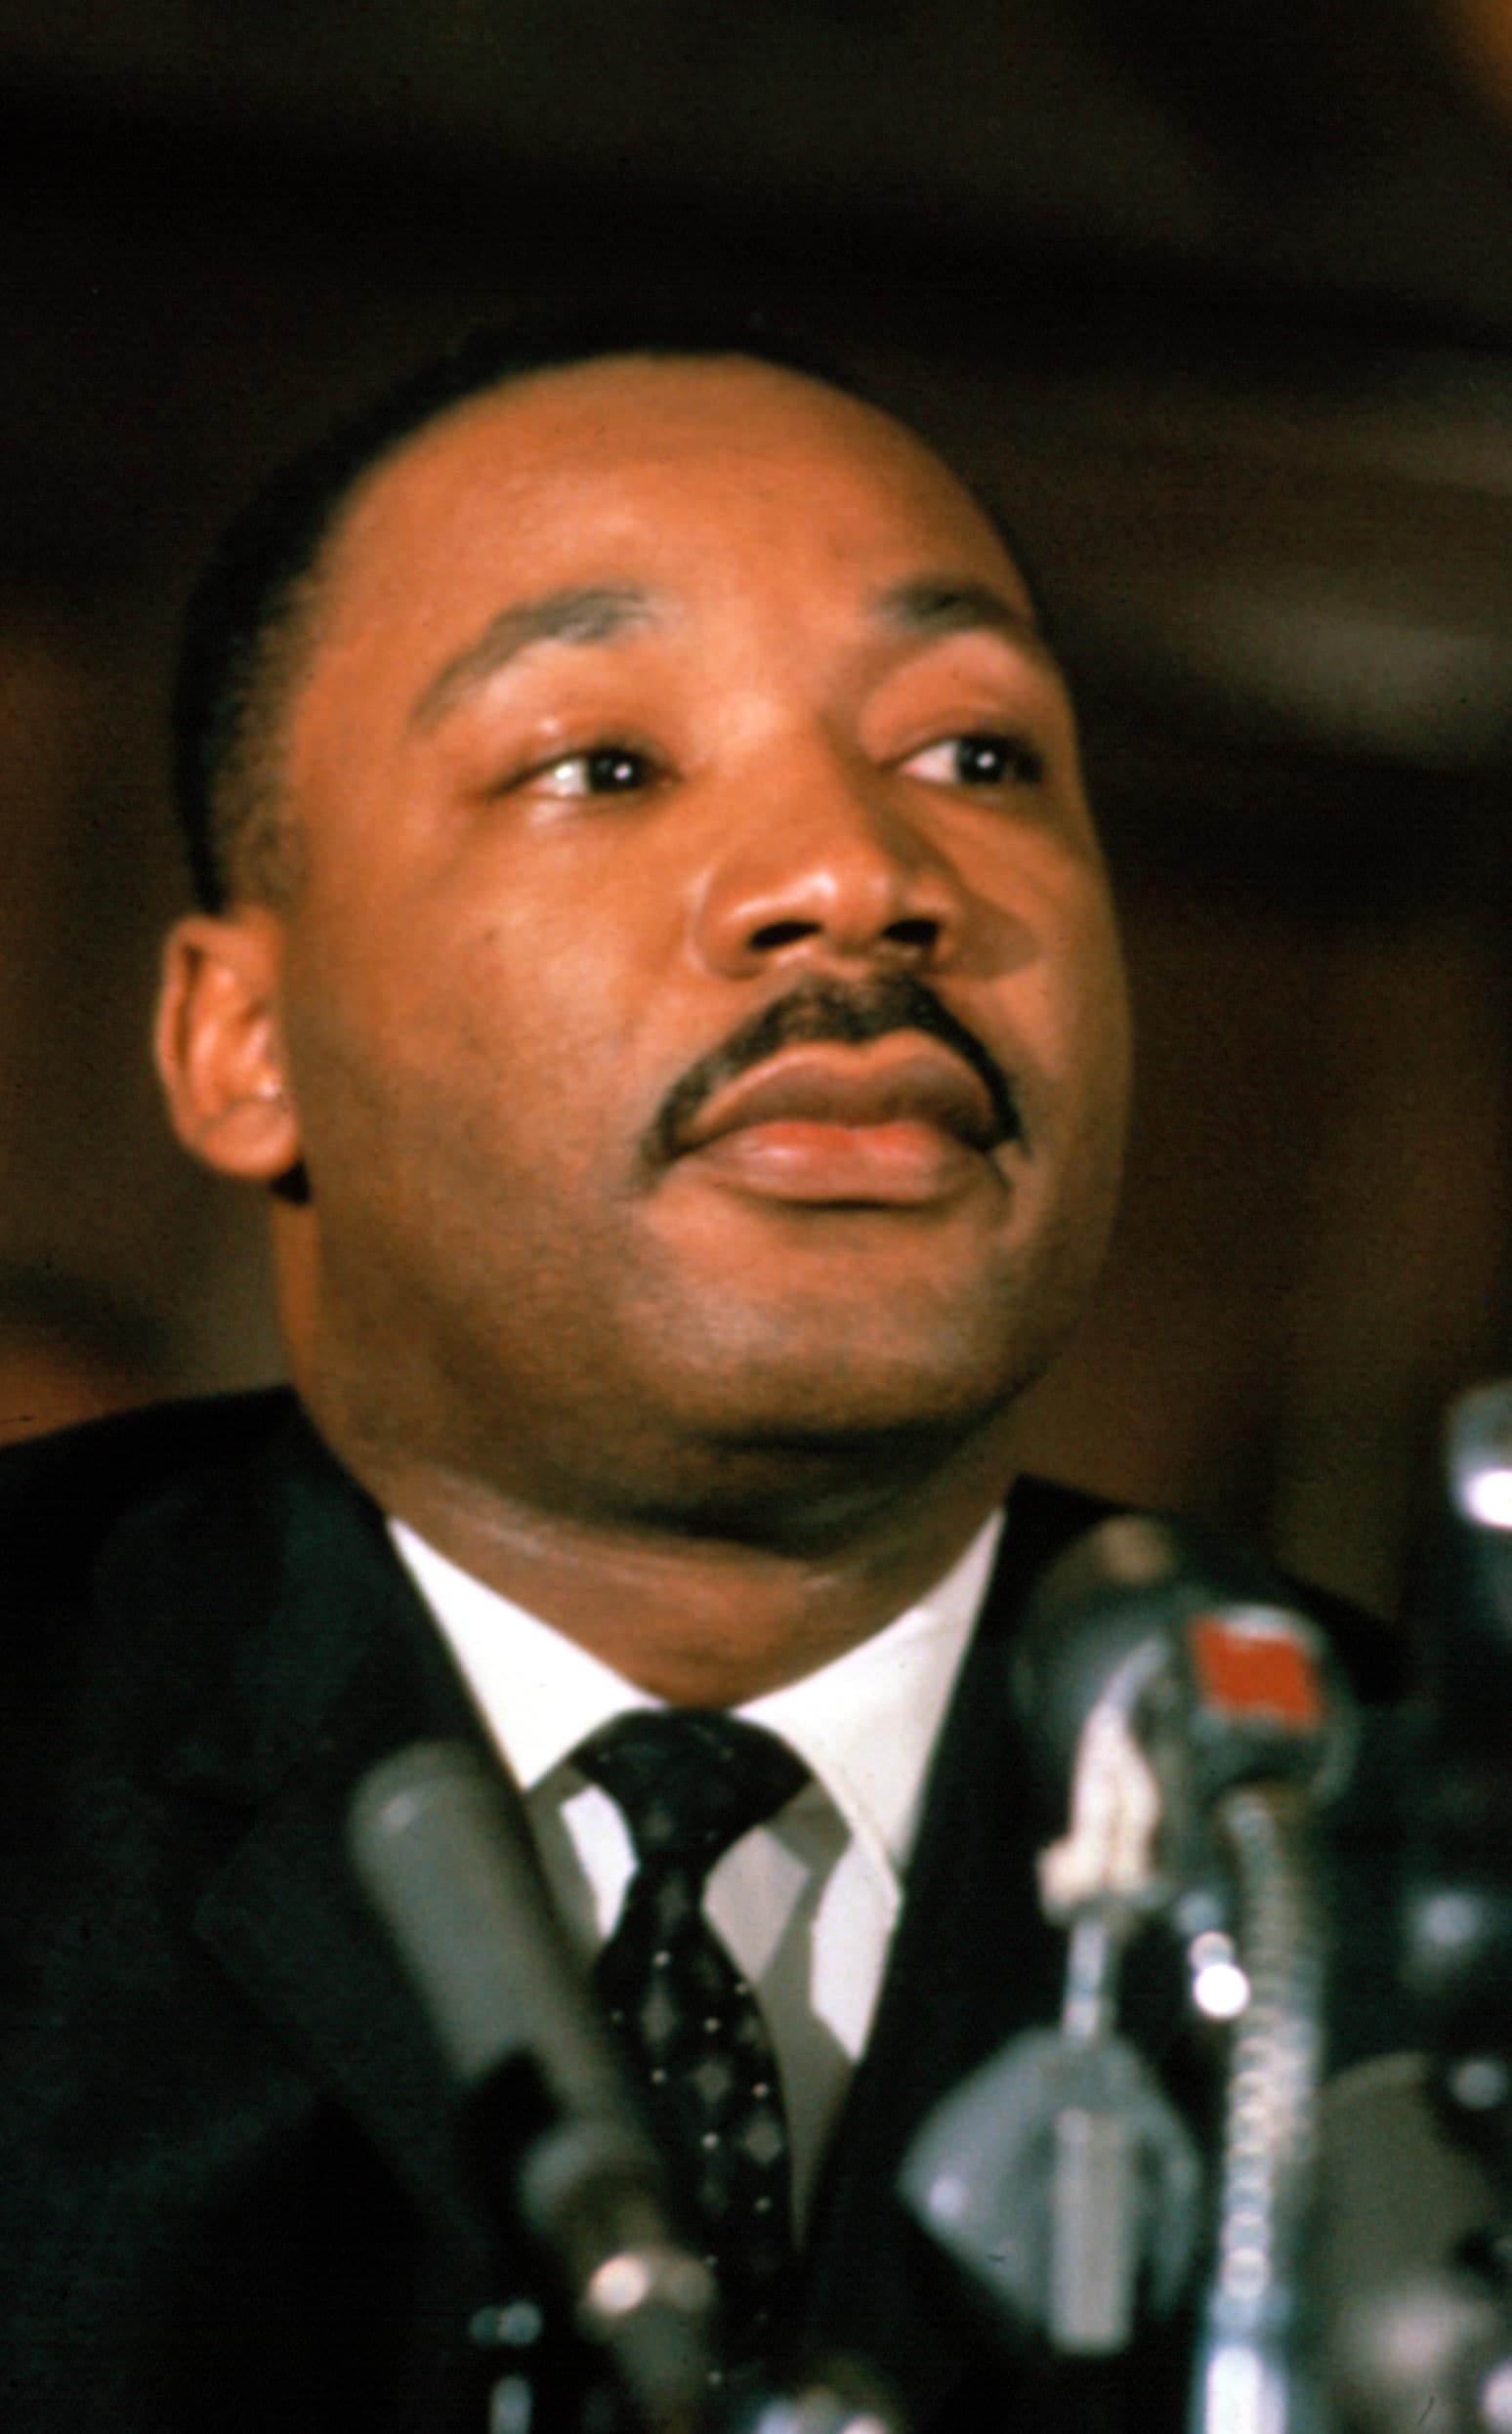 MARTIN LUTHER KING, JR. 